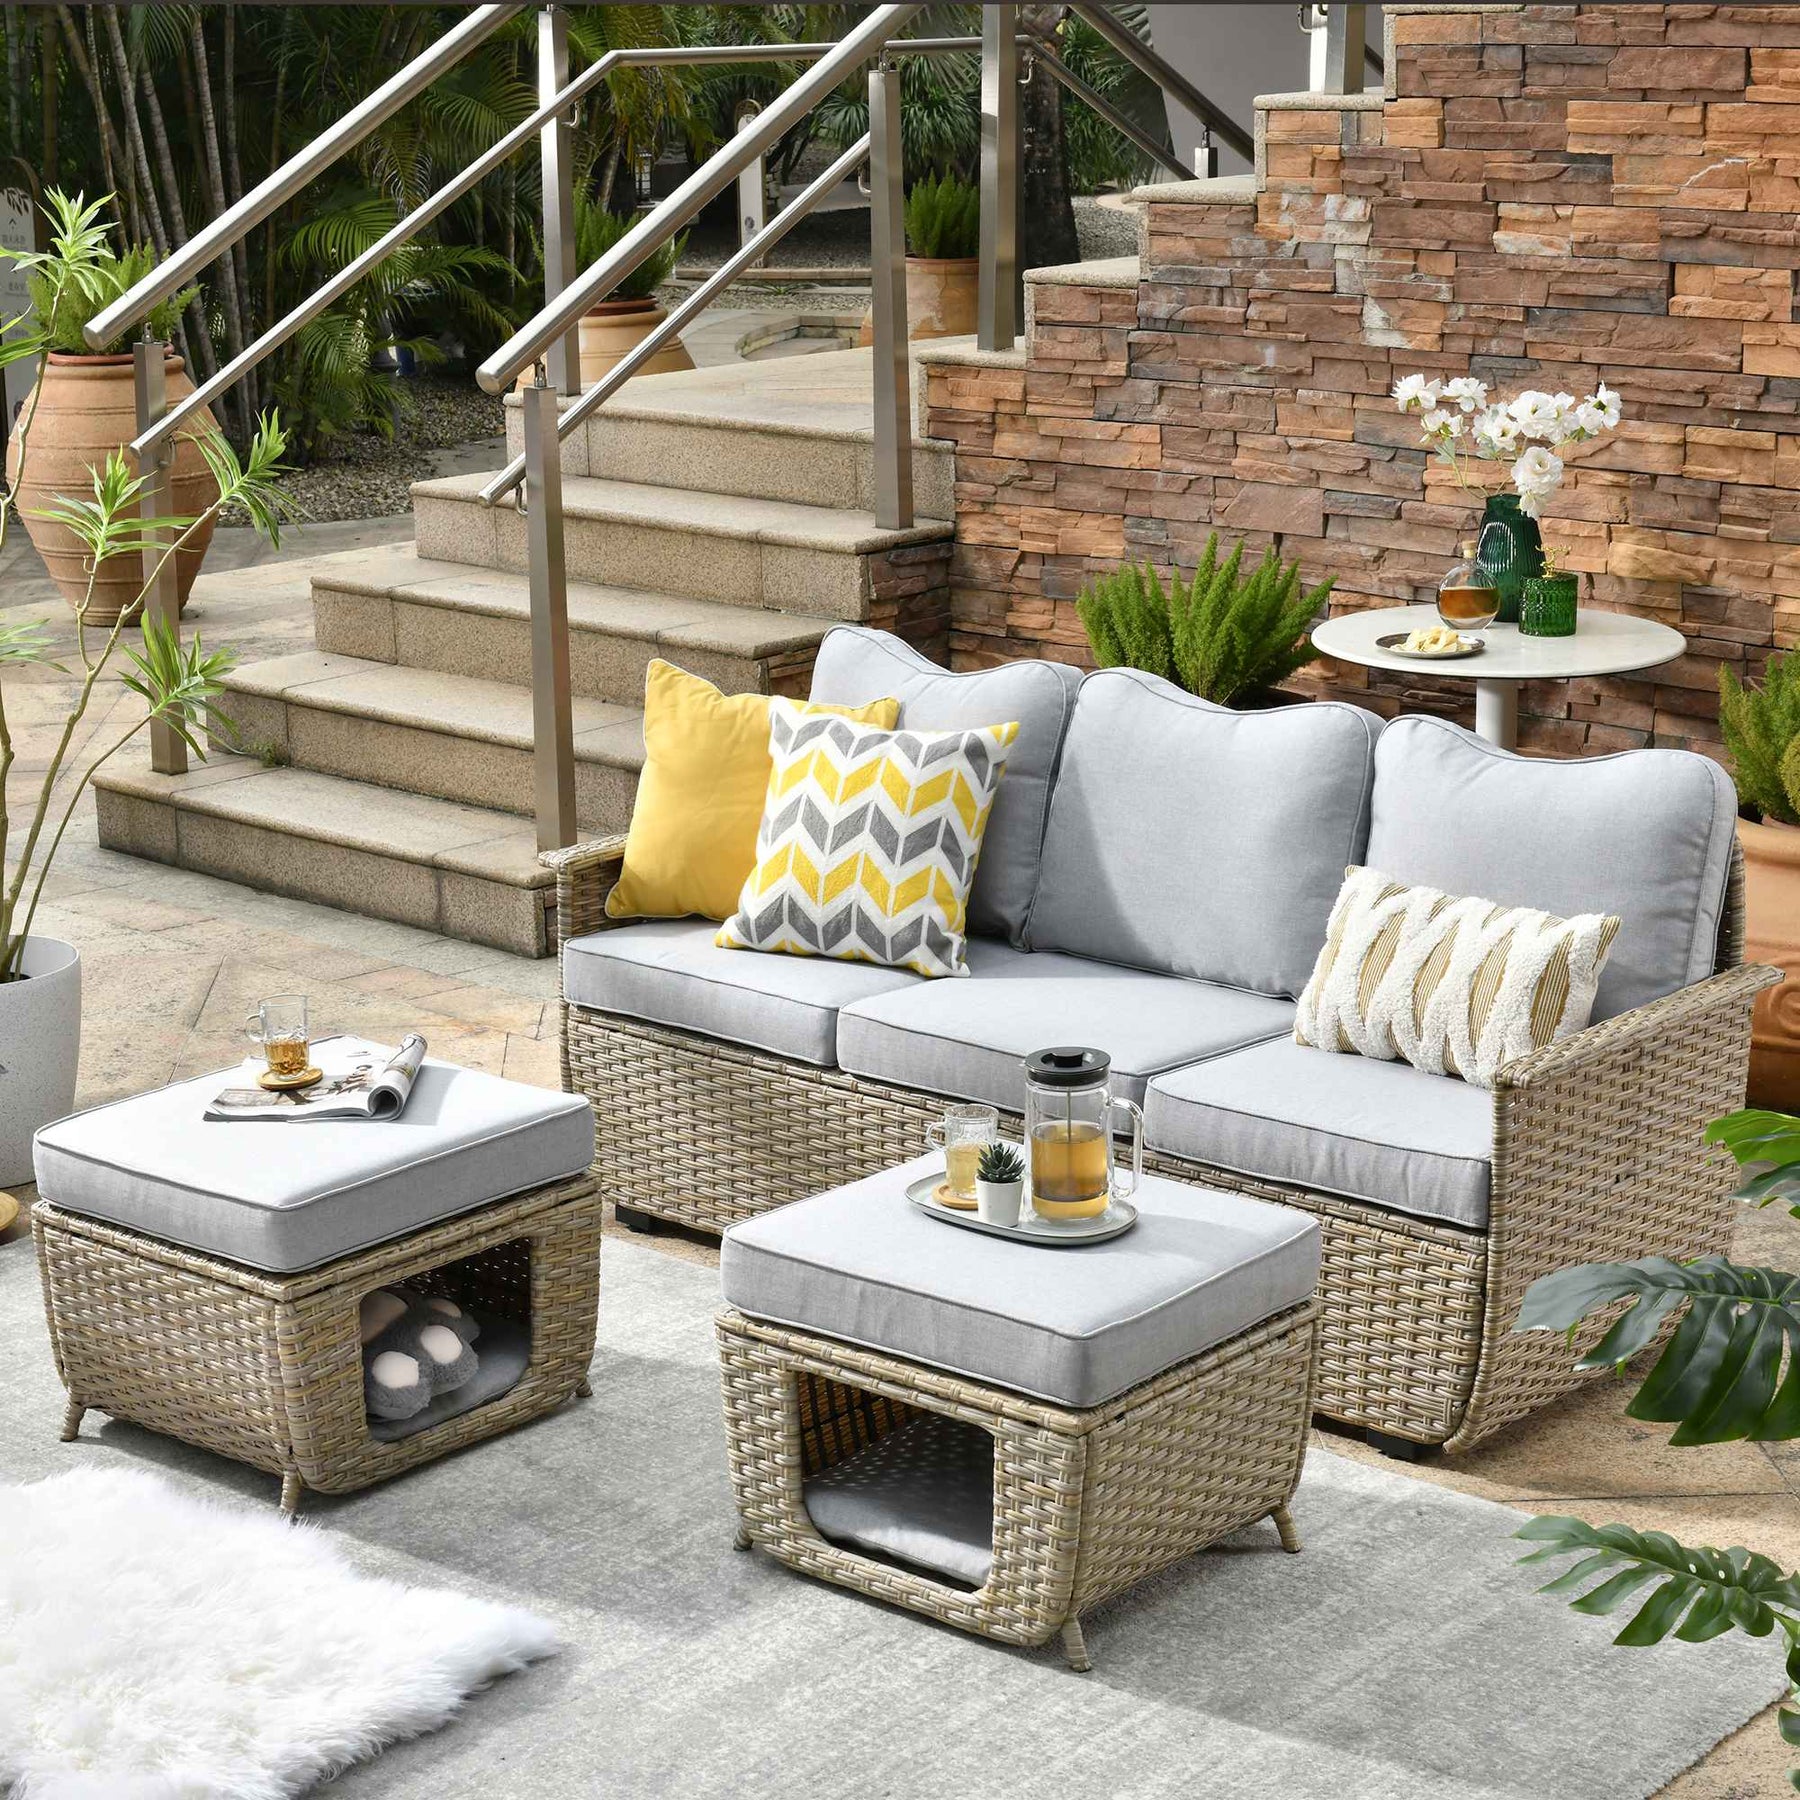 Ovios Outdoor Sofa Set 3 Pieces Beige Wicker Couch with Multifunctional Storage Ottomans